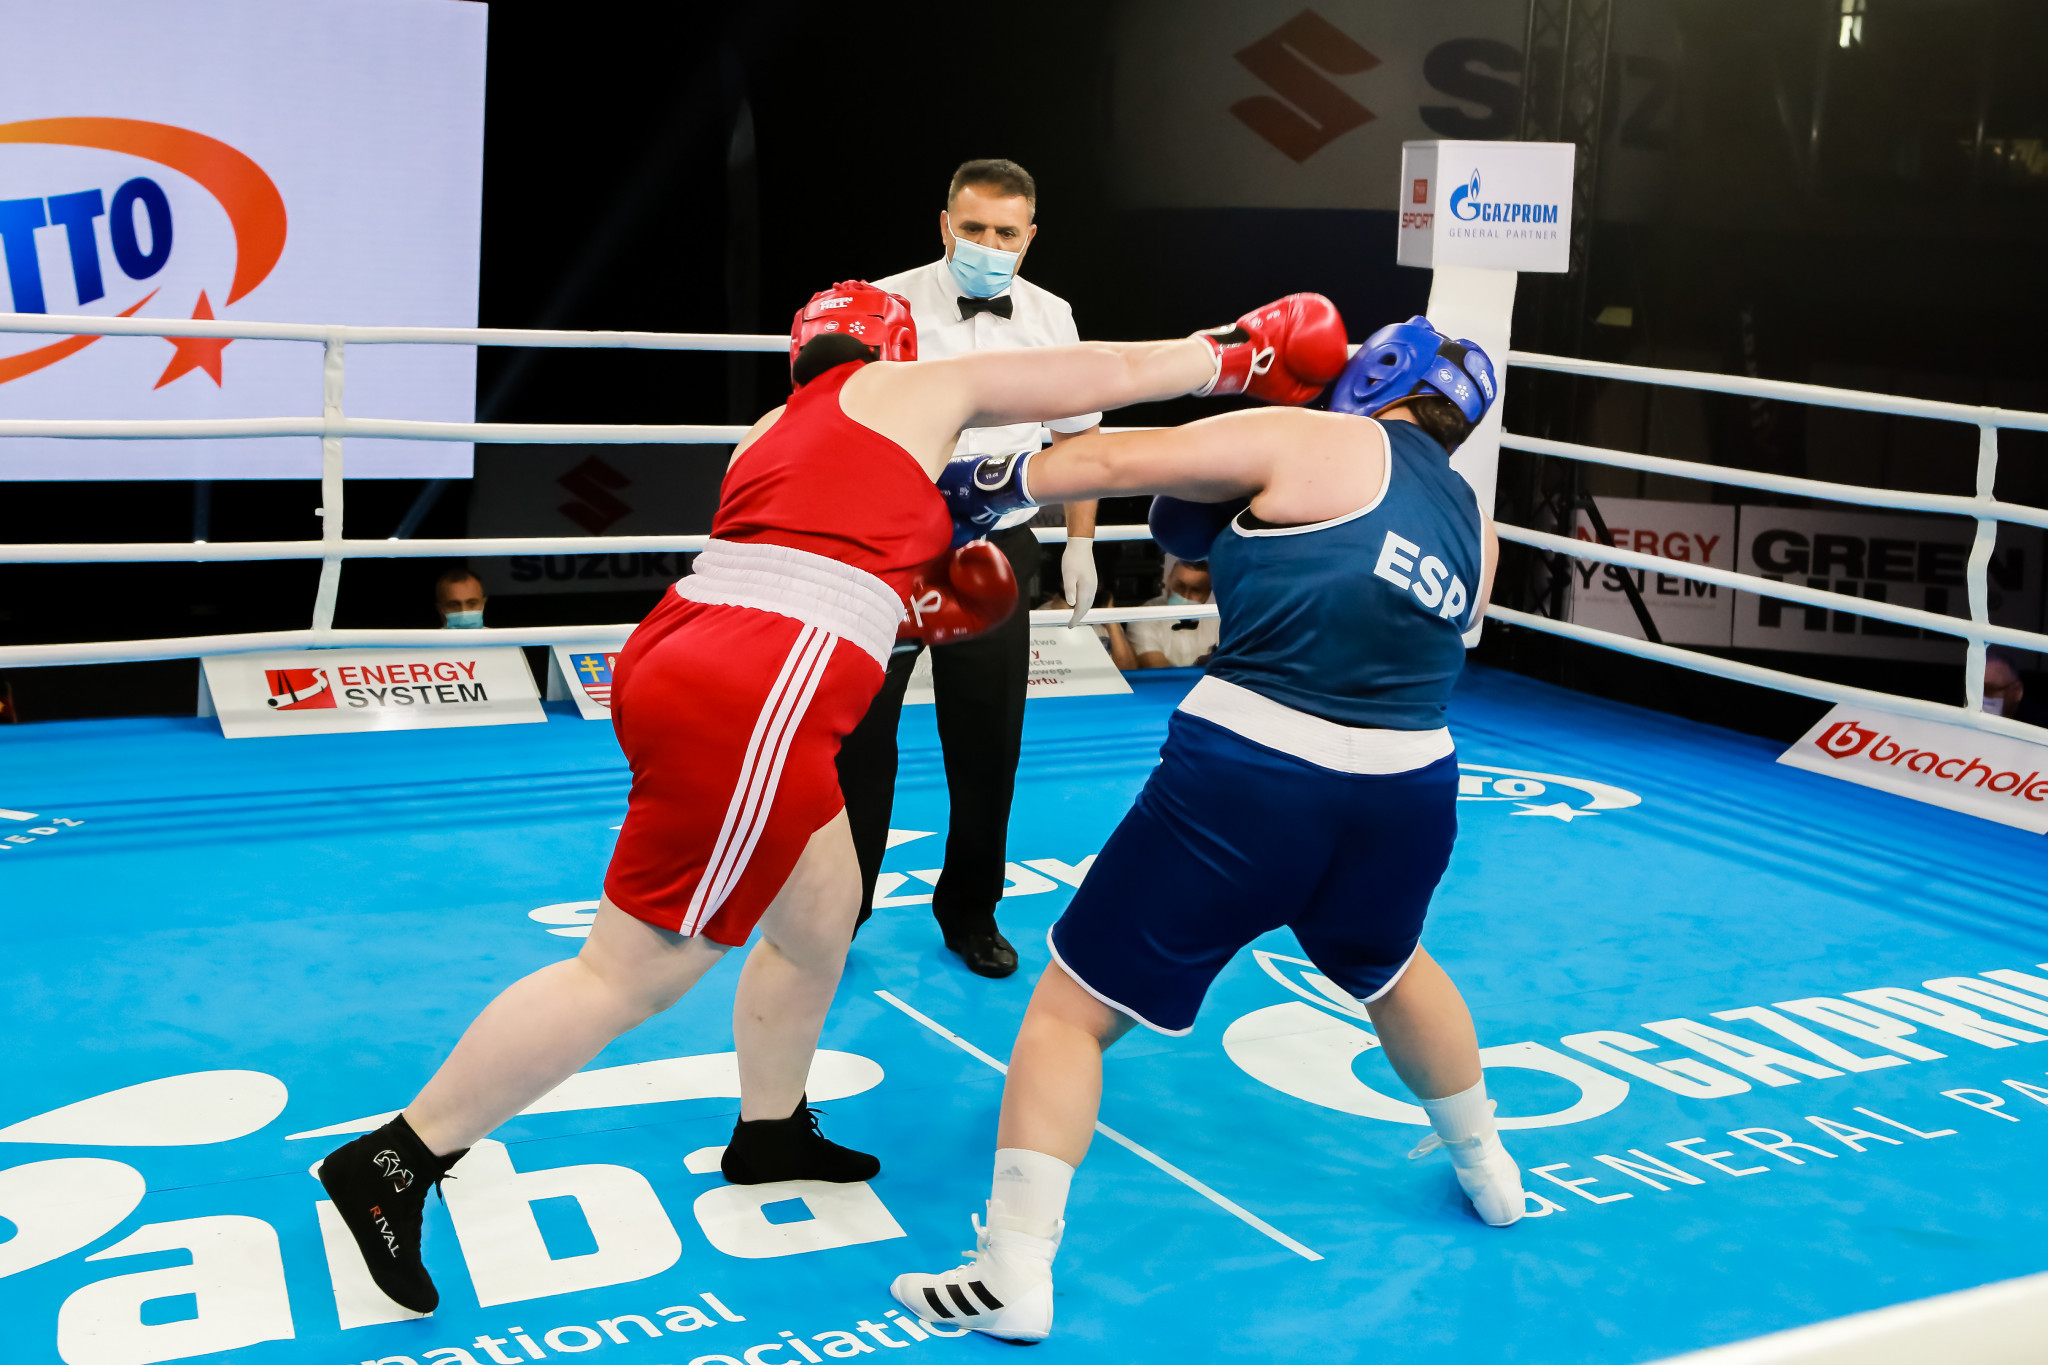 Women's fights dominated the schedule on the sixth day of the competition ©AIBA